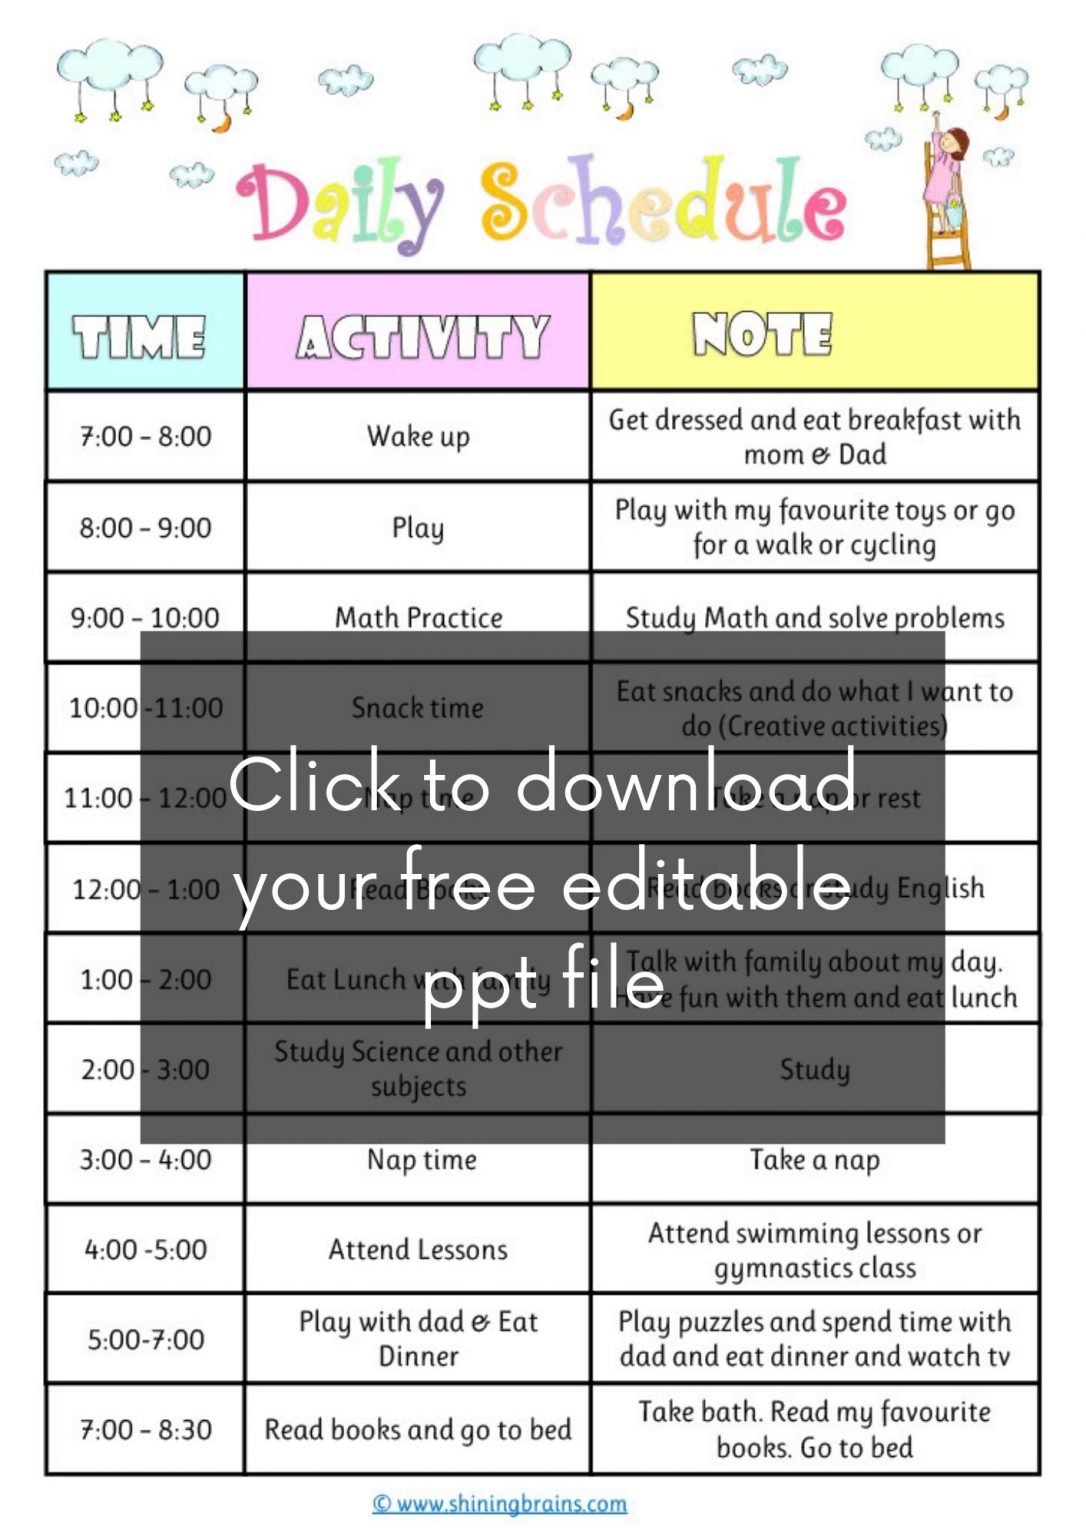 daily schedule with photos for kids